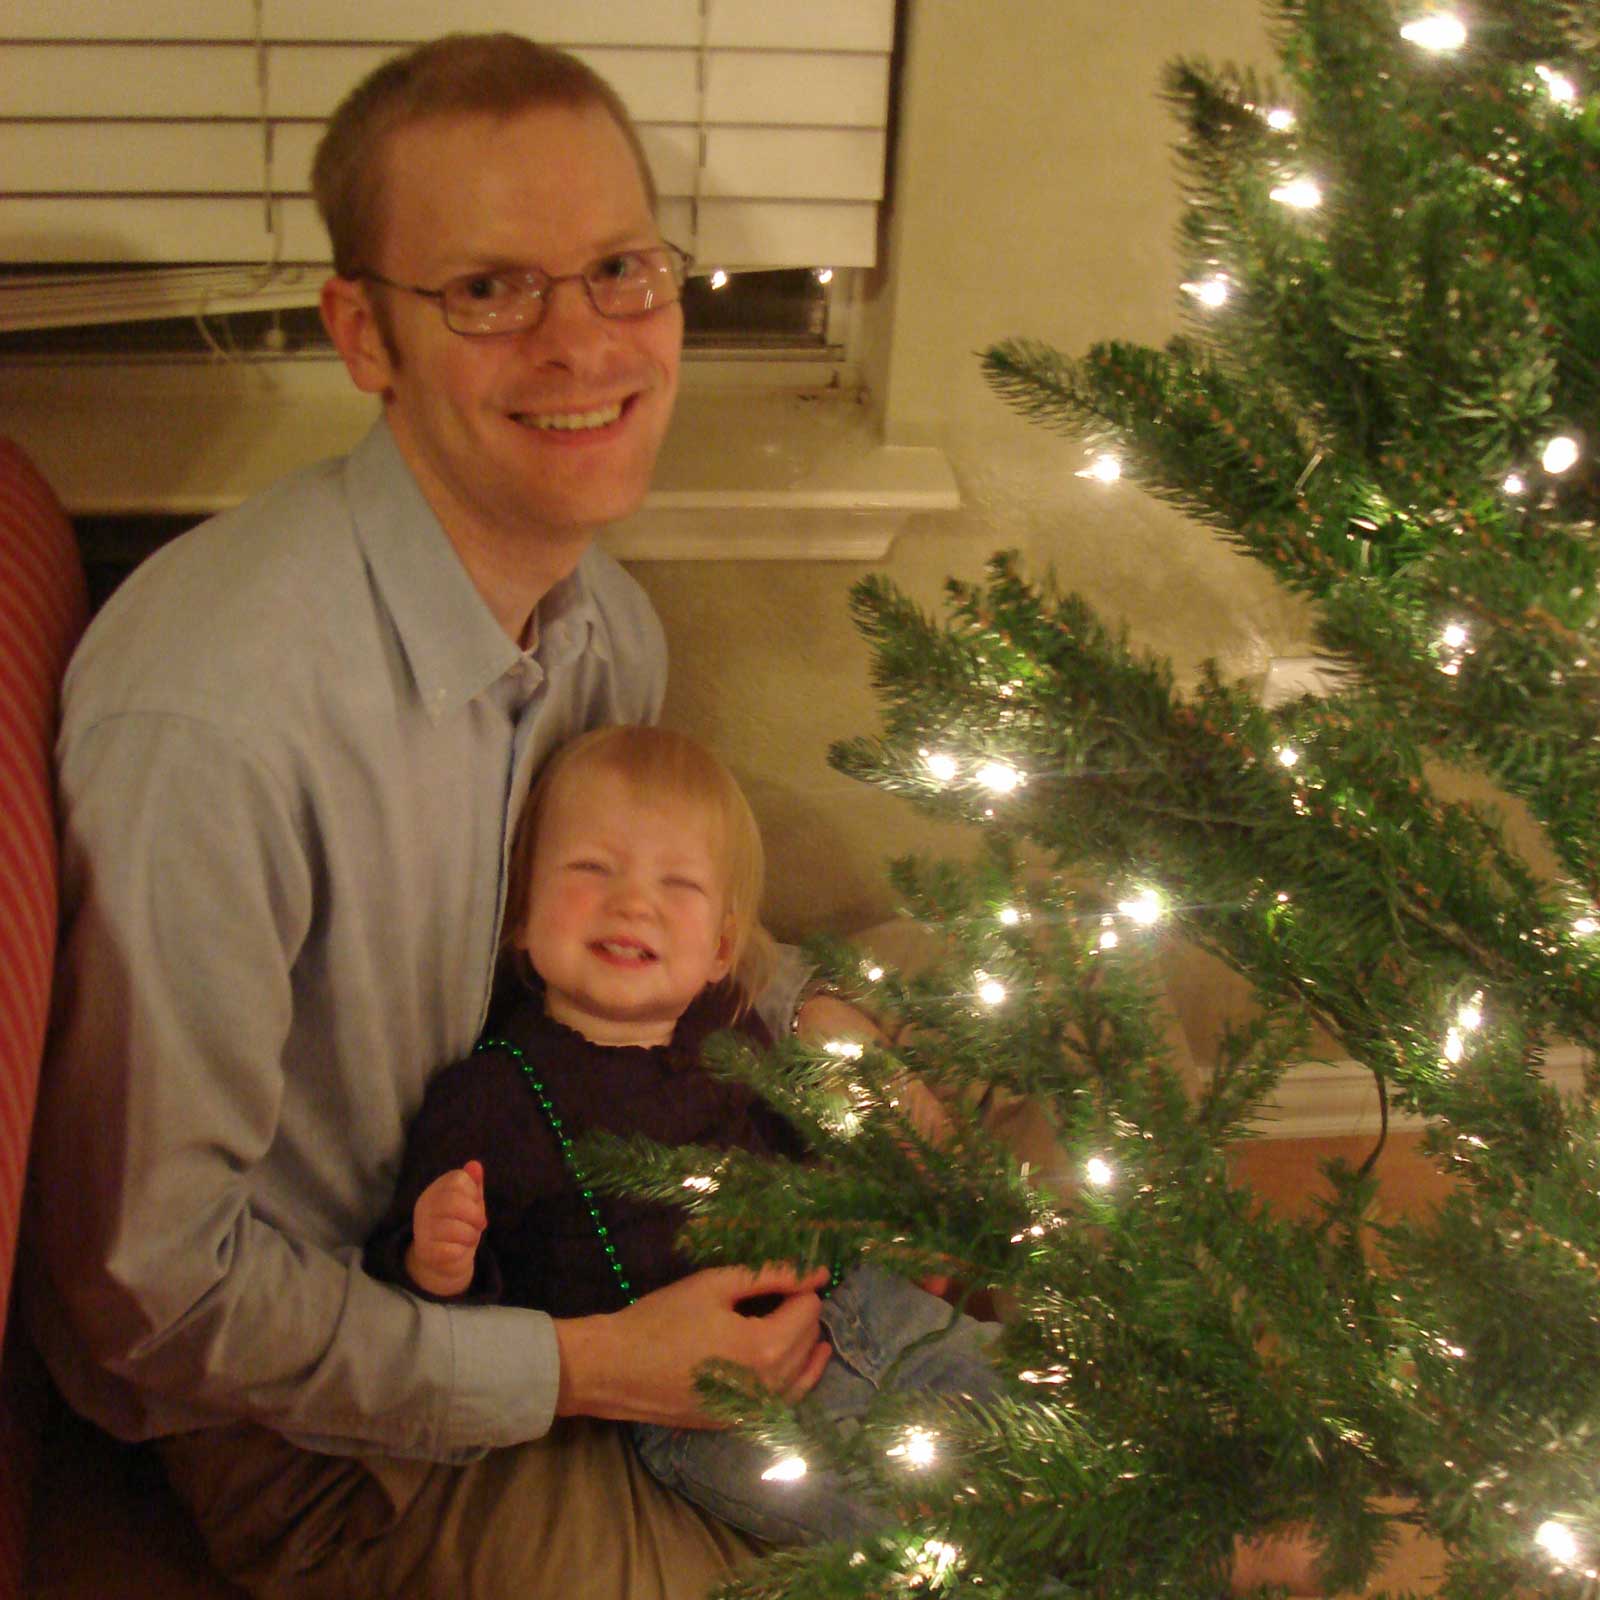 William, Emily, and our Christmas tree